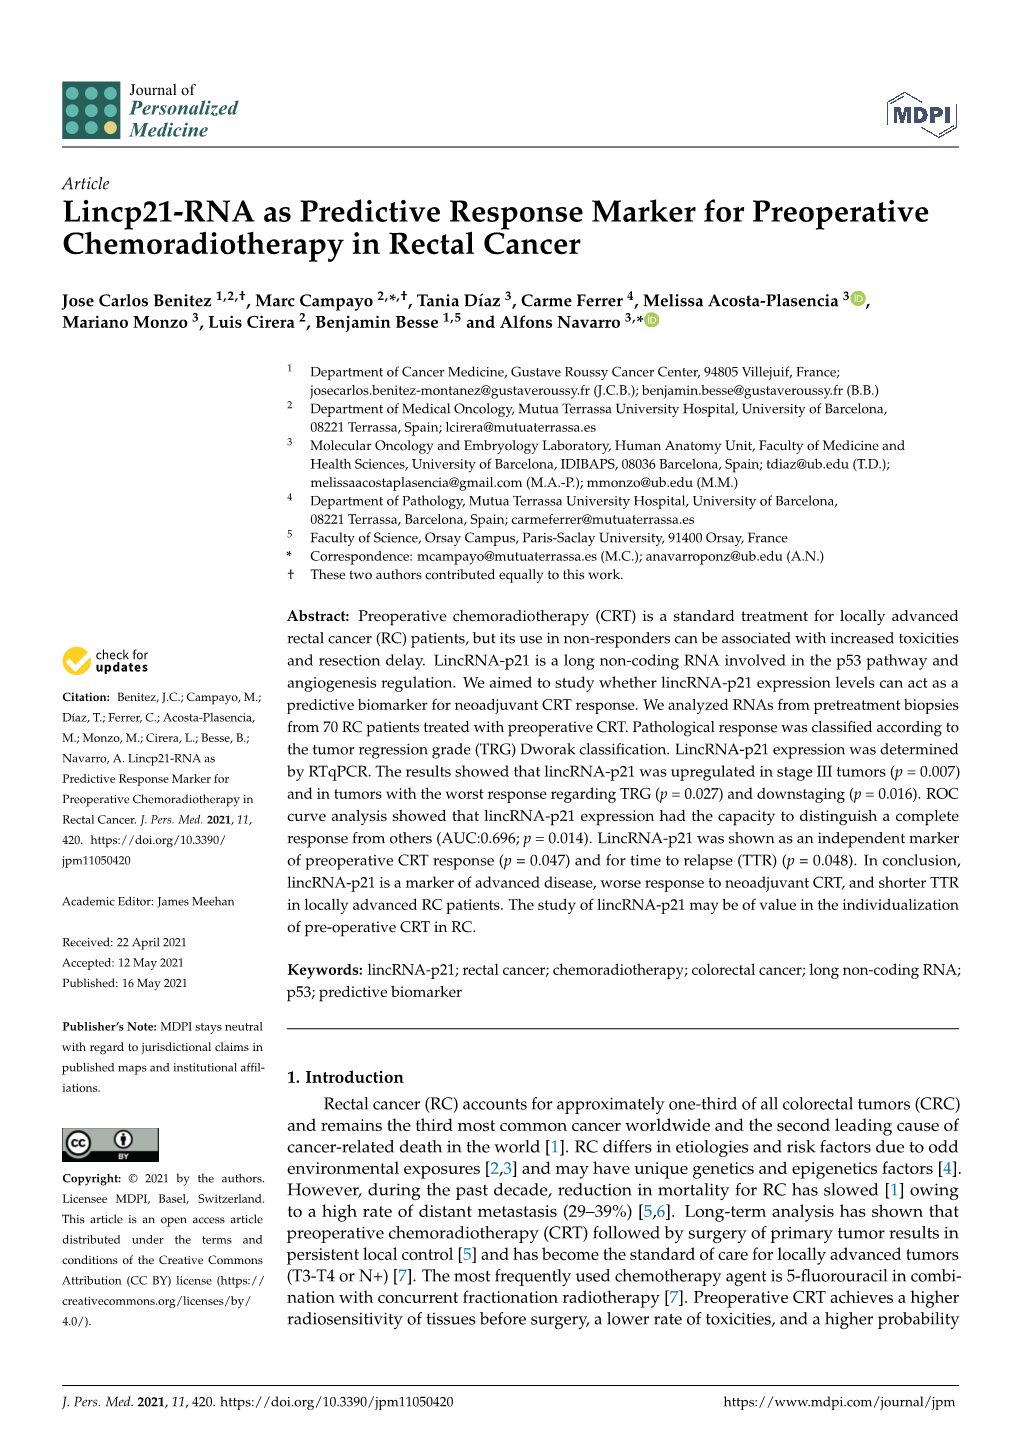 Lincp21-RNA As Predictive Response Marker for Preoperative Chemoradiotherapy in Rectal Cancer